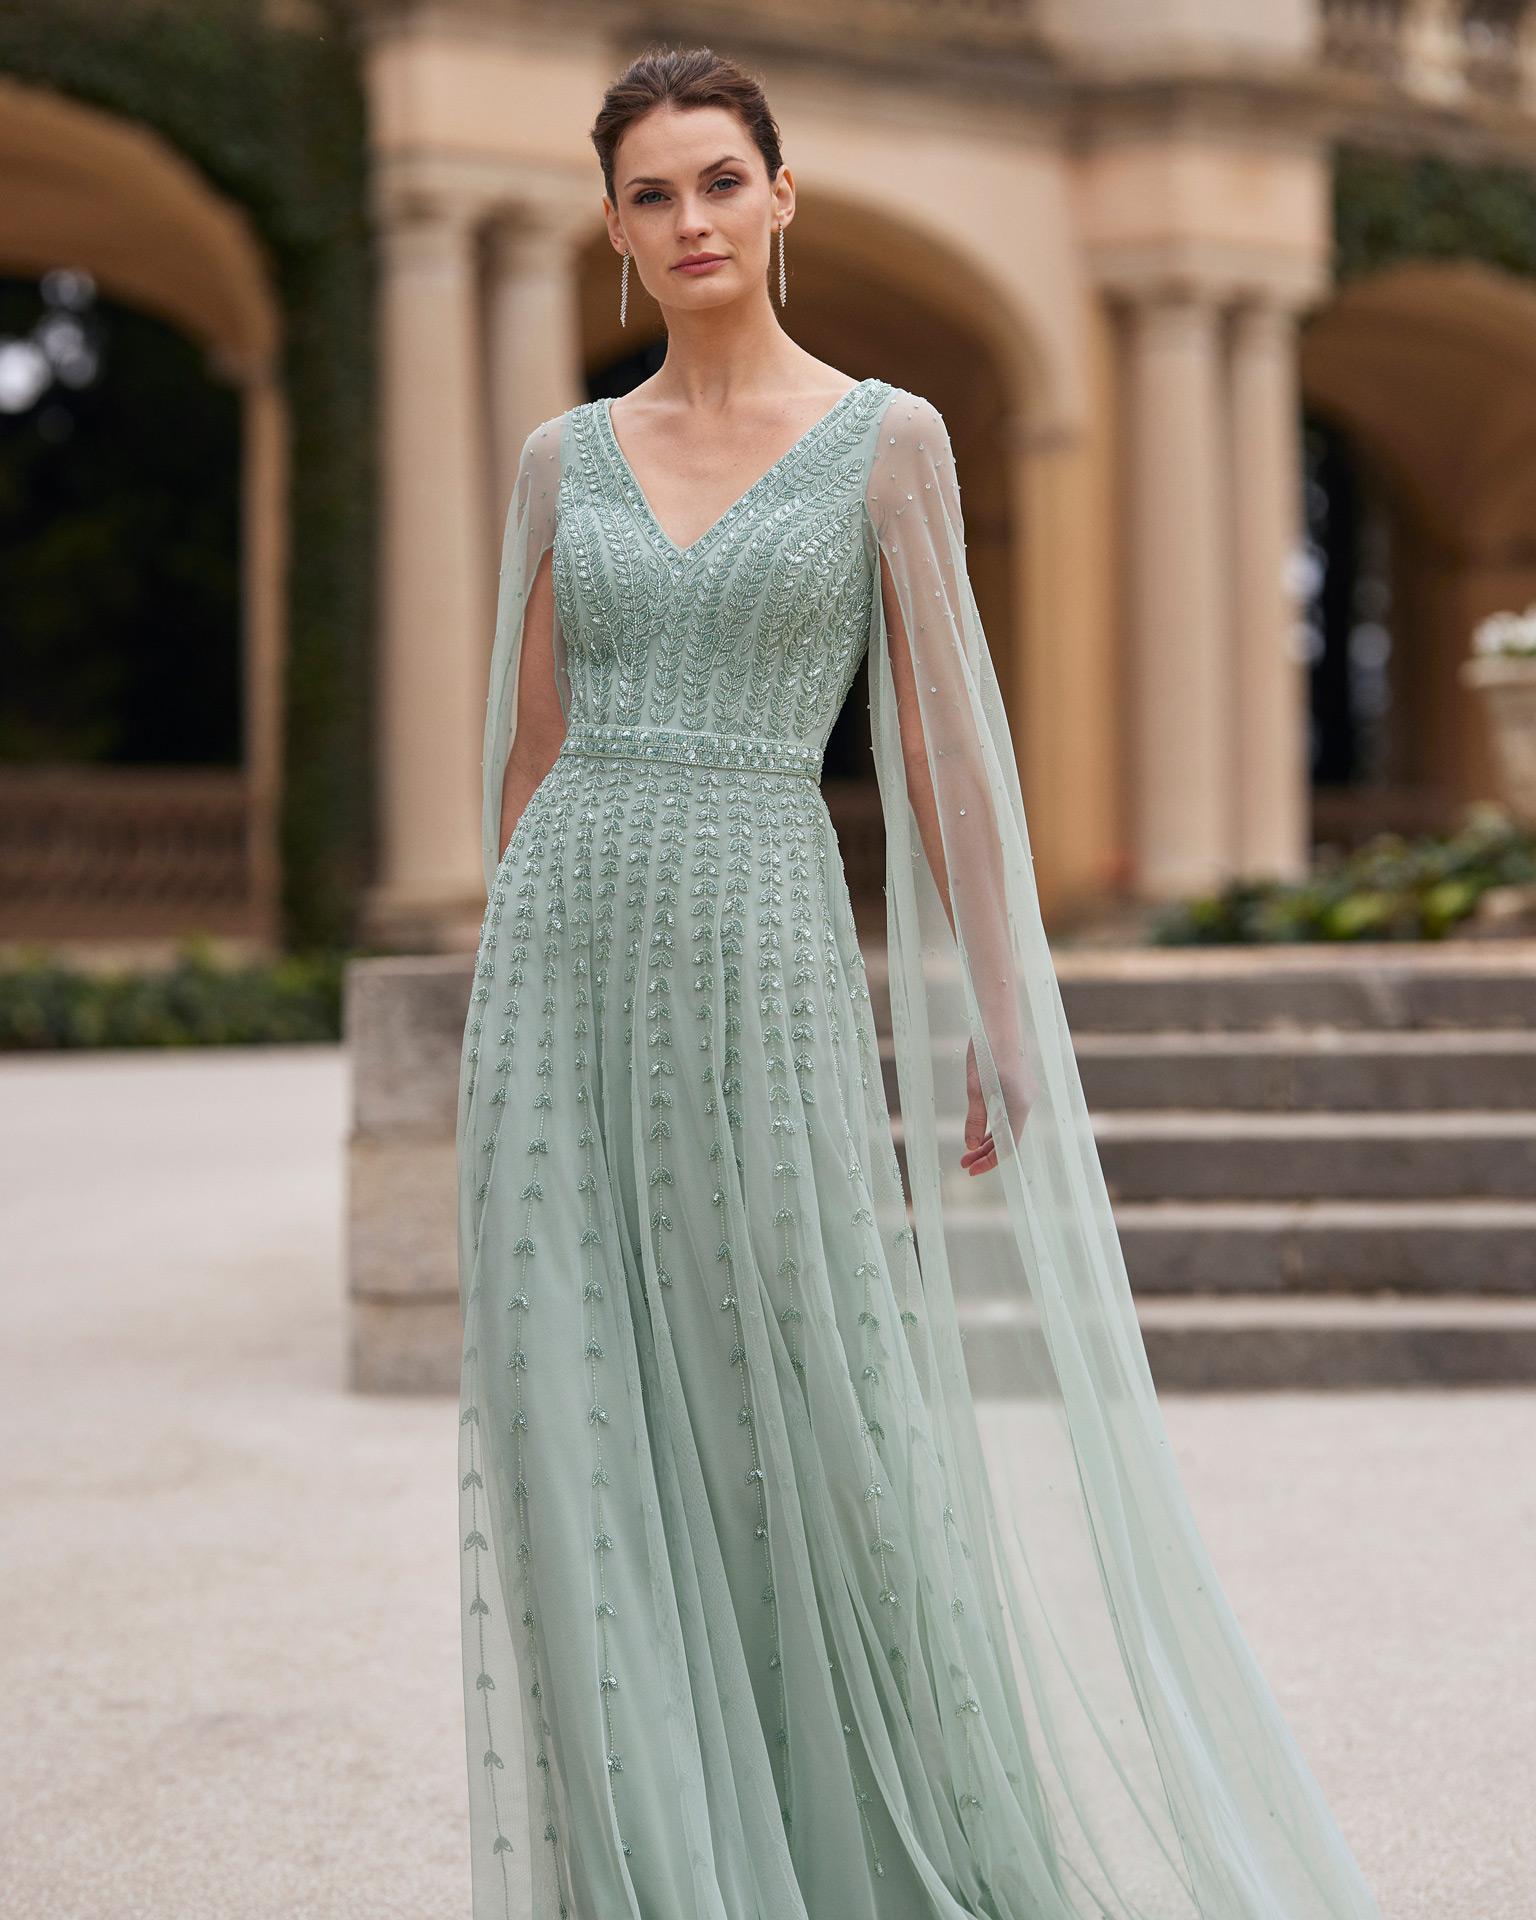 Elegant long cocktail dress. Made with beadwork. With V-neckline, zip back and cape sleeves. Couture Club design. MARFIL_BARCELONA.